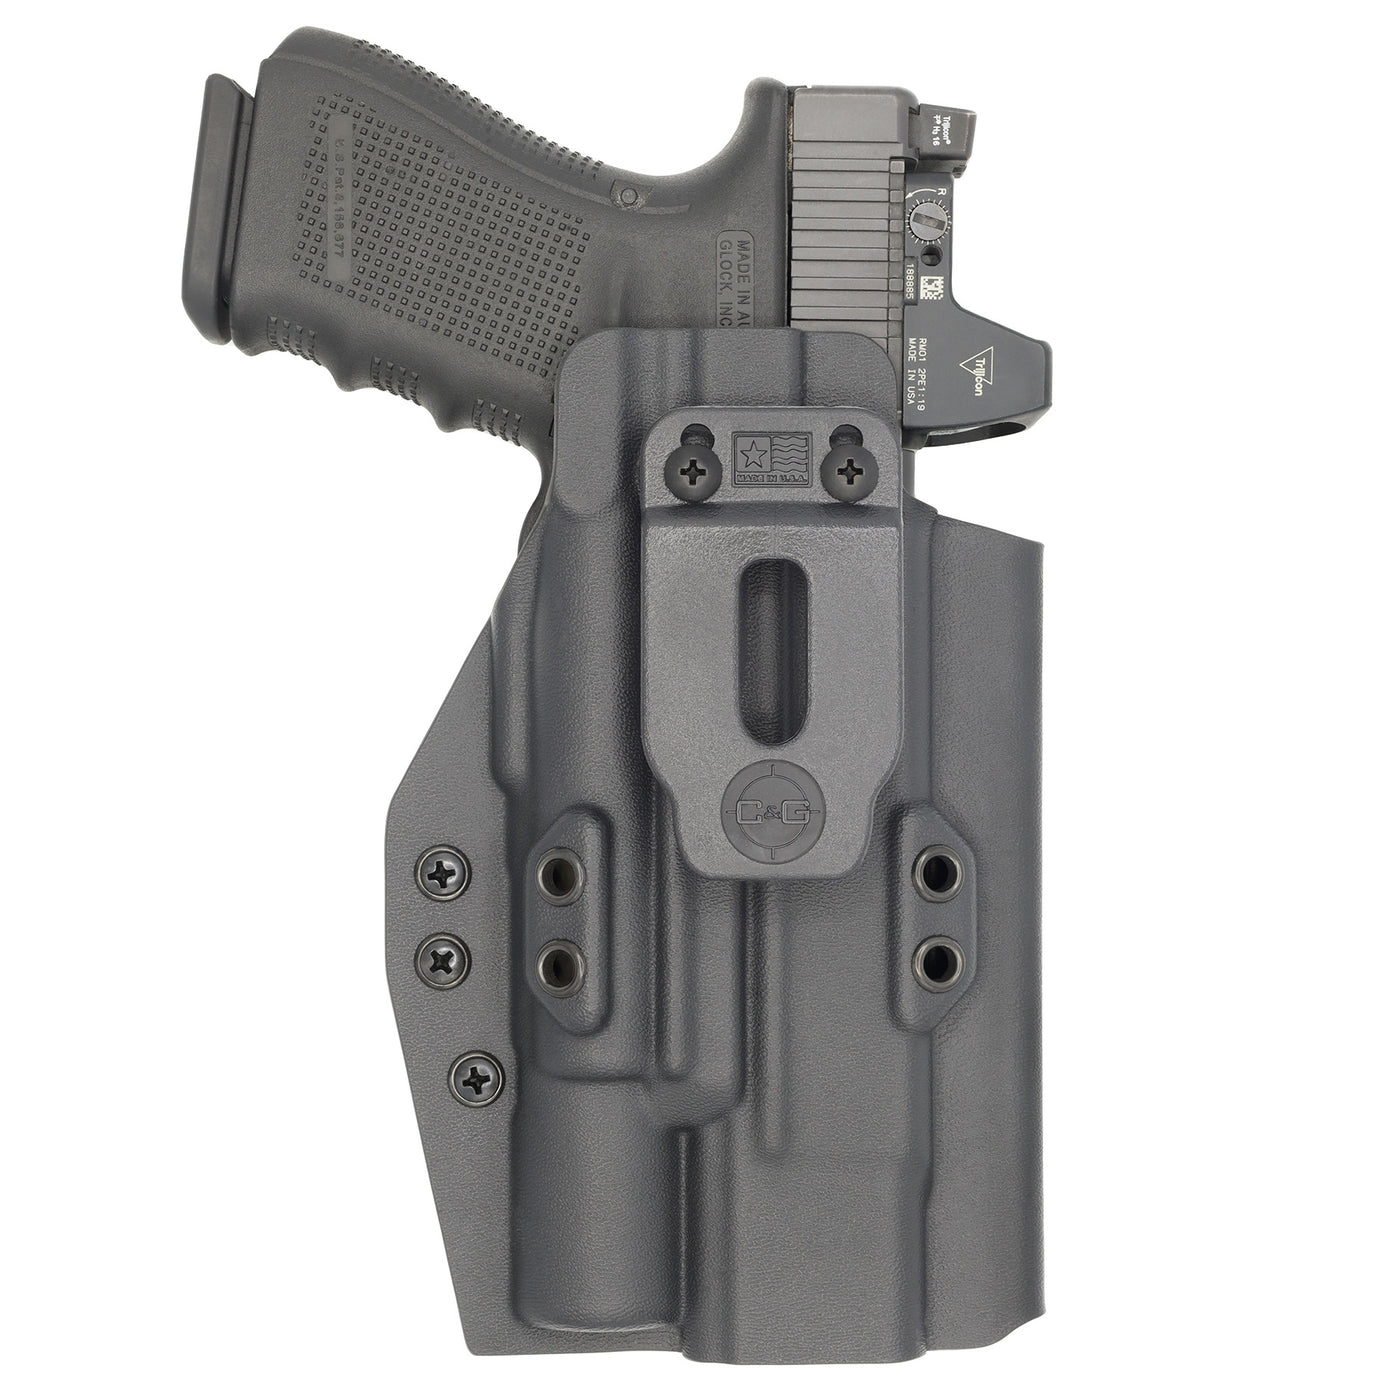 C&G Holsters Quickship IWB Tactical Glock Surefire X300 in holstered position